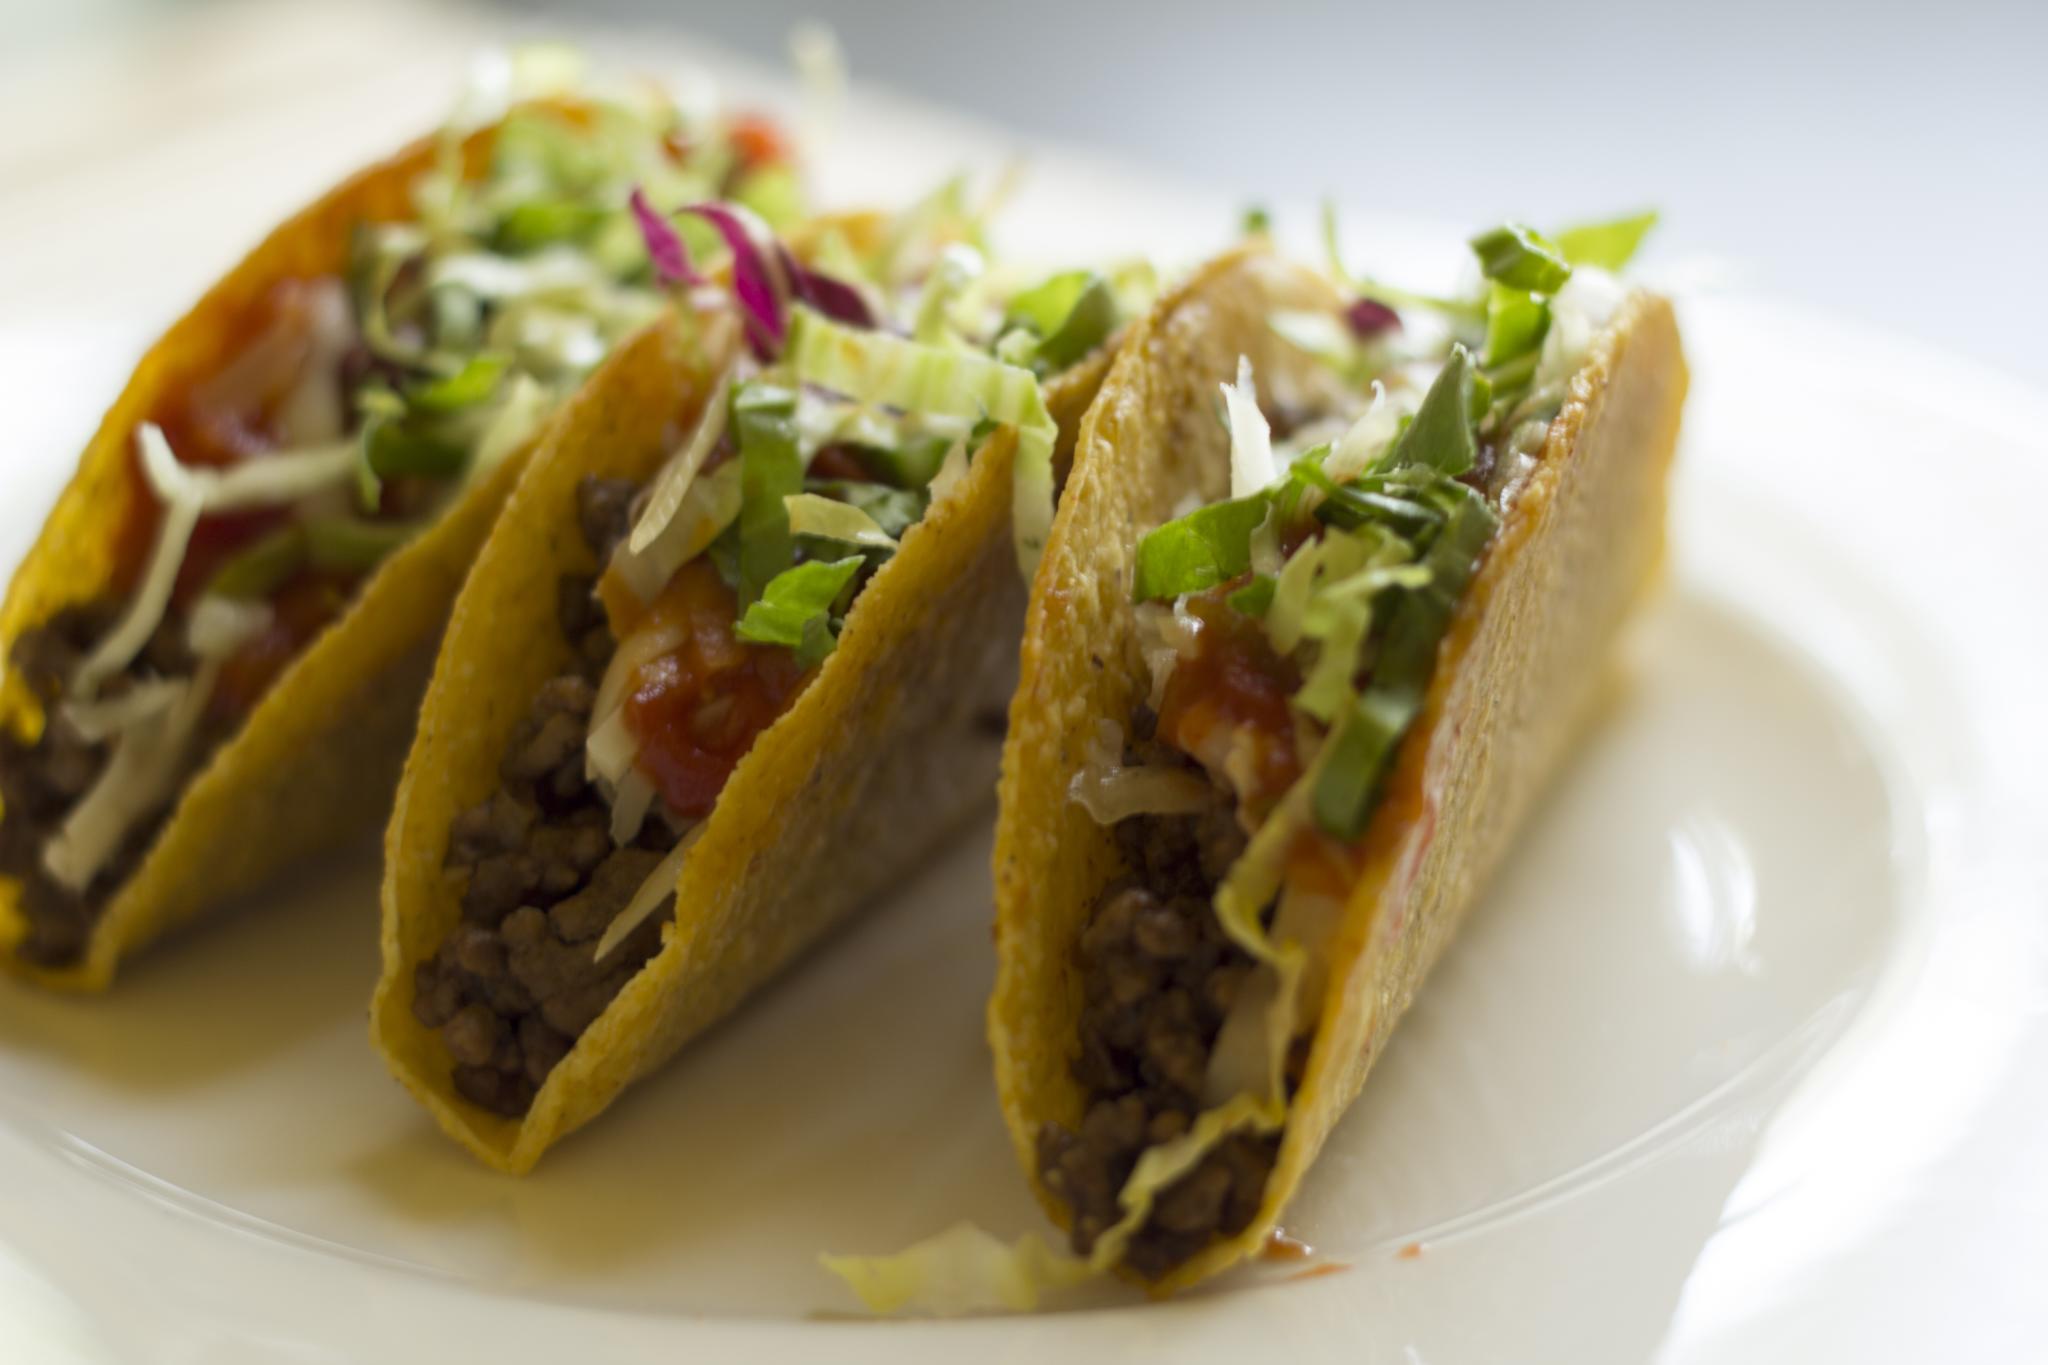 File:Mexican tacos (9055162205).jpg - Wikimedia Commons